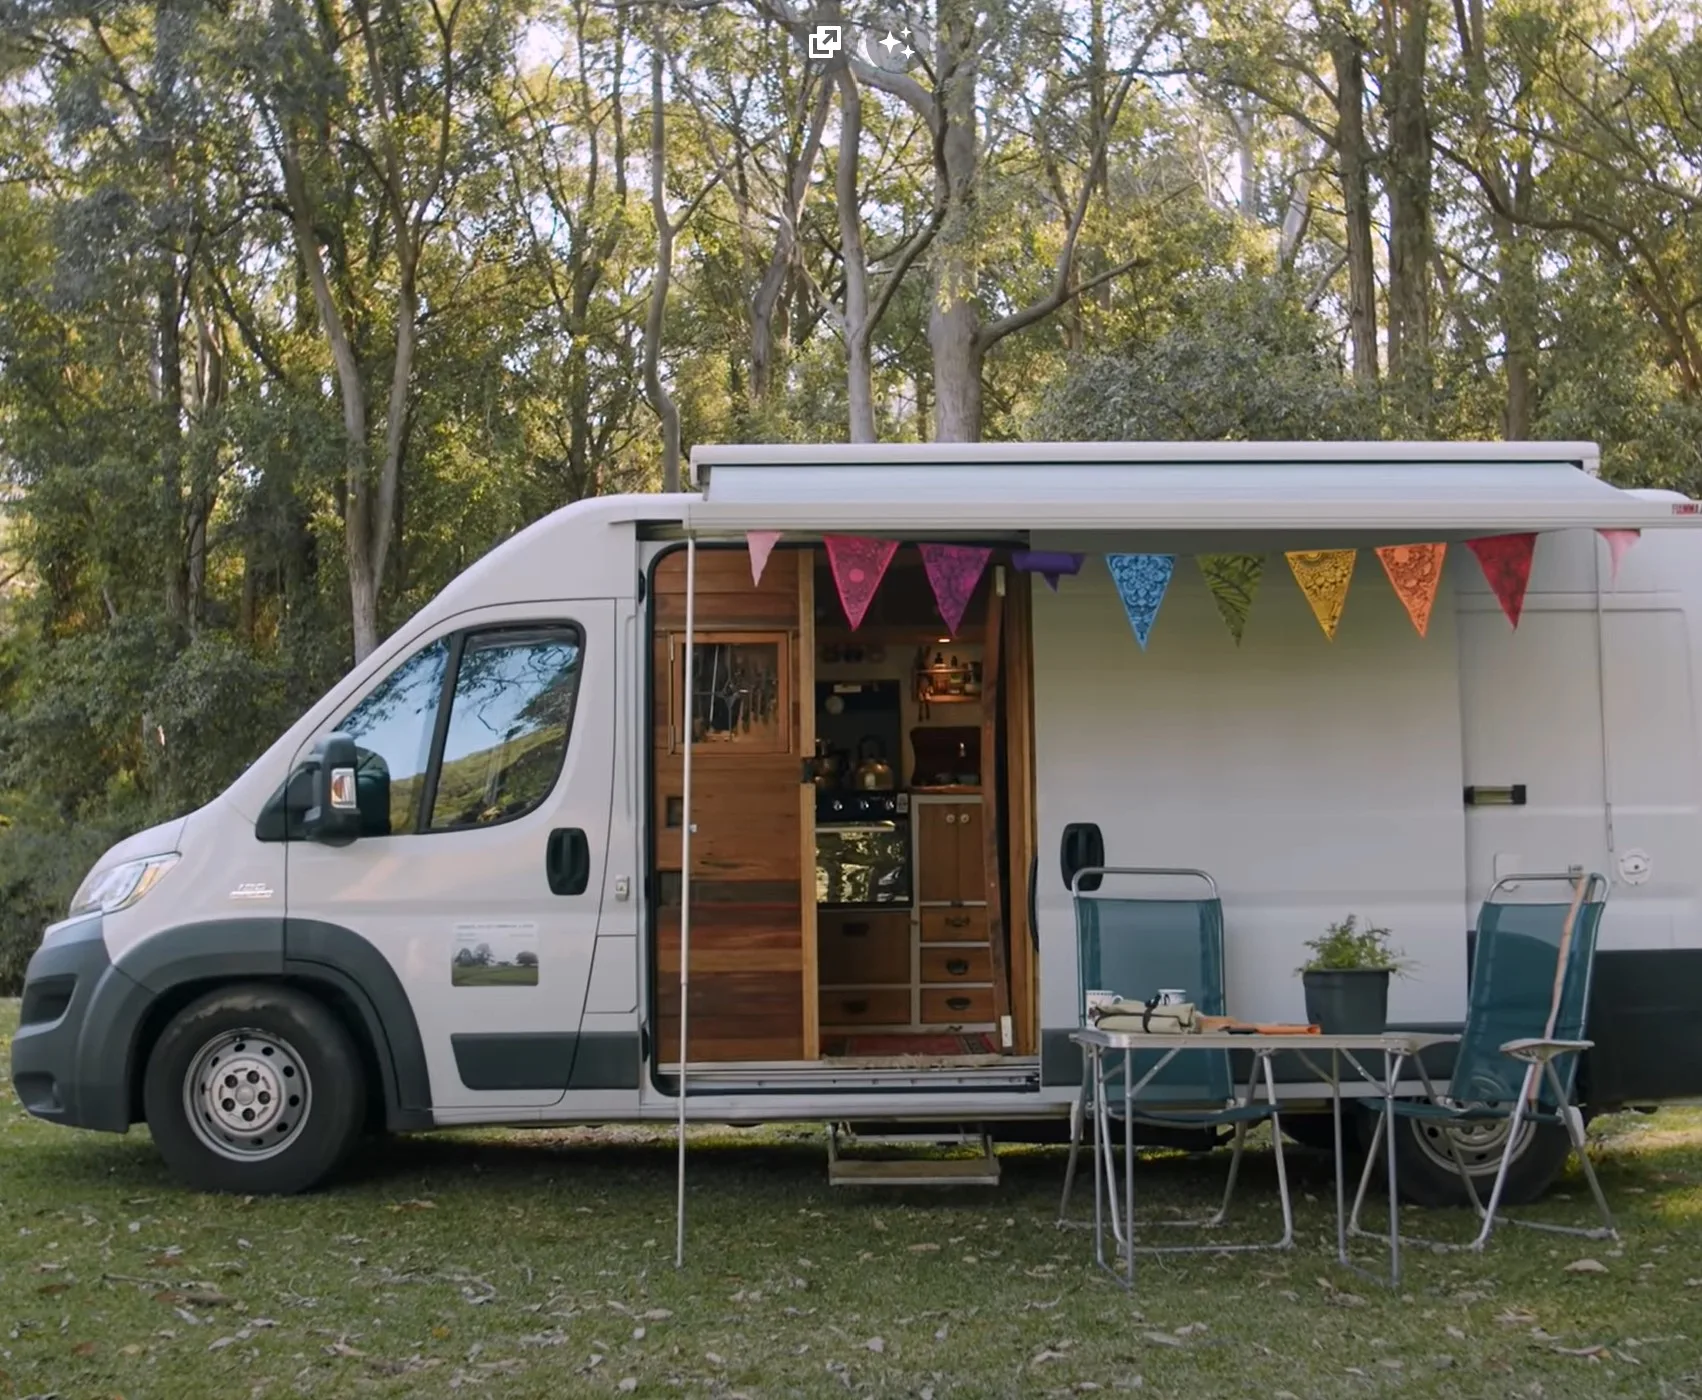 Side view of Claire's van showing its beautiful door and outdoor table and chairs.